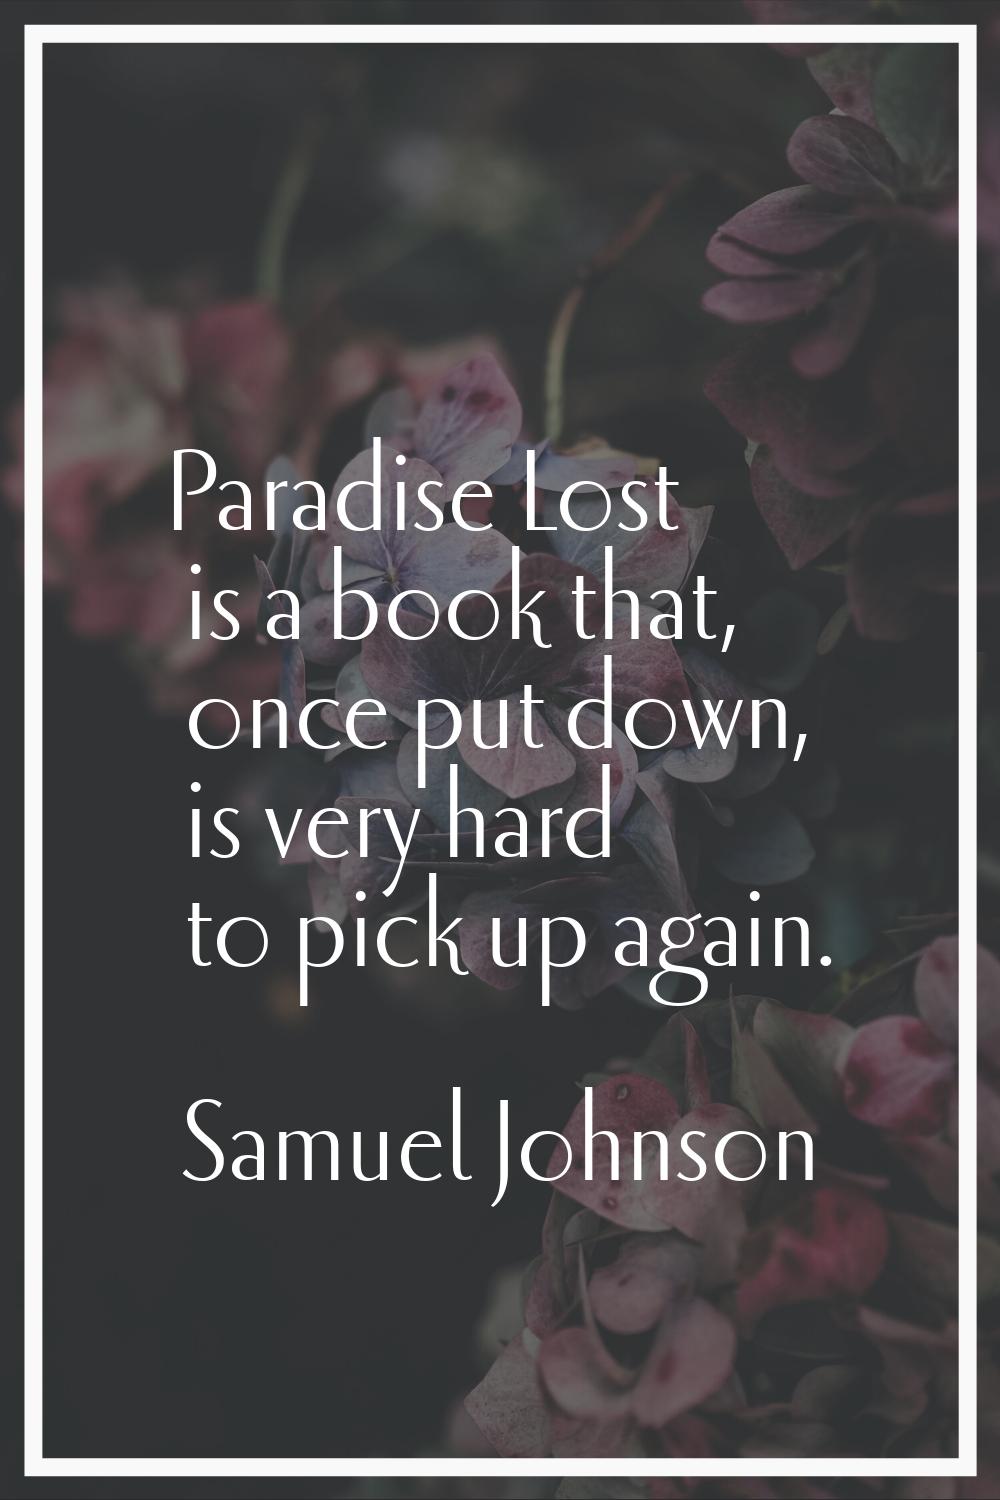 Paradise Lost is a book that, once put down, is very hard to pick up again.